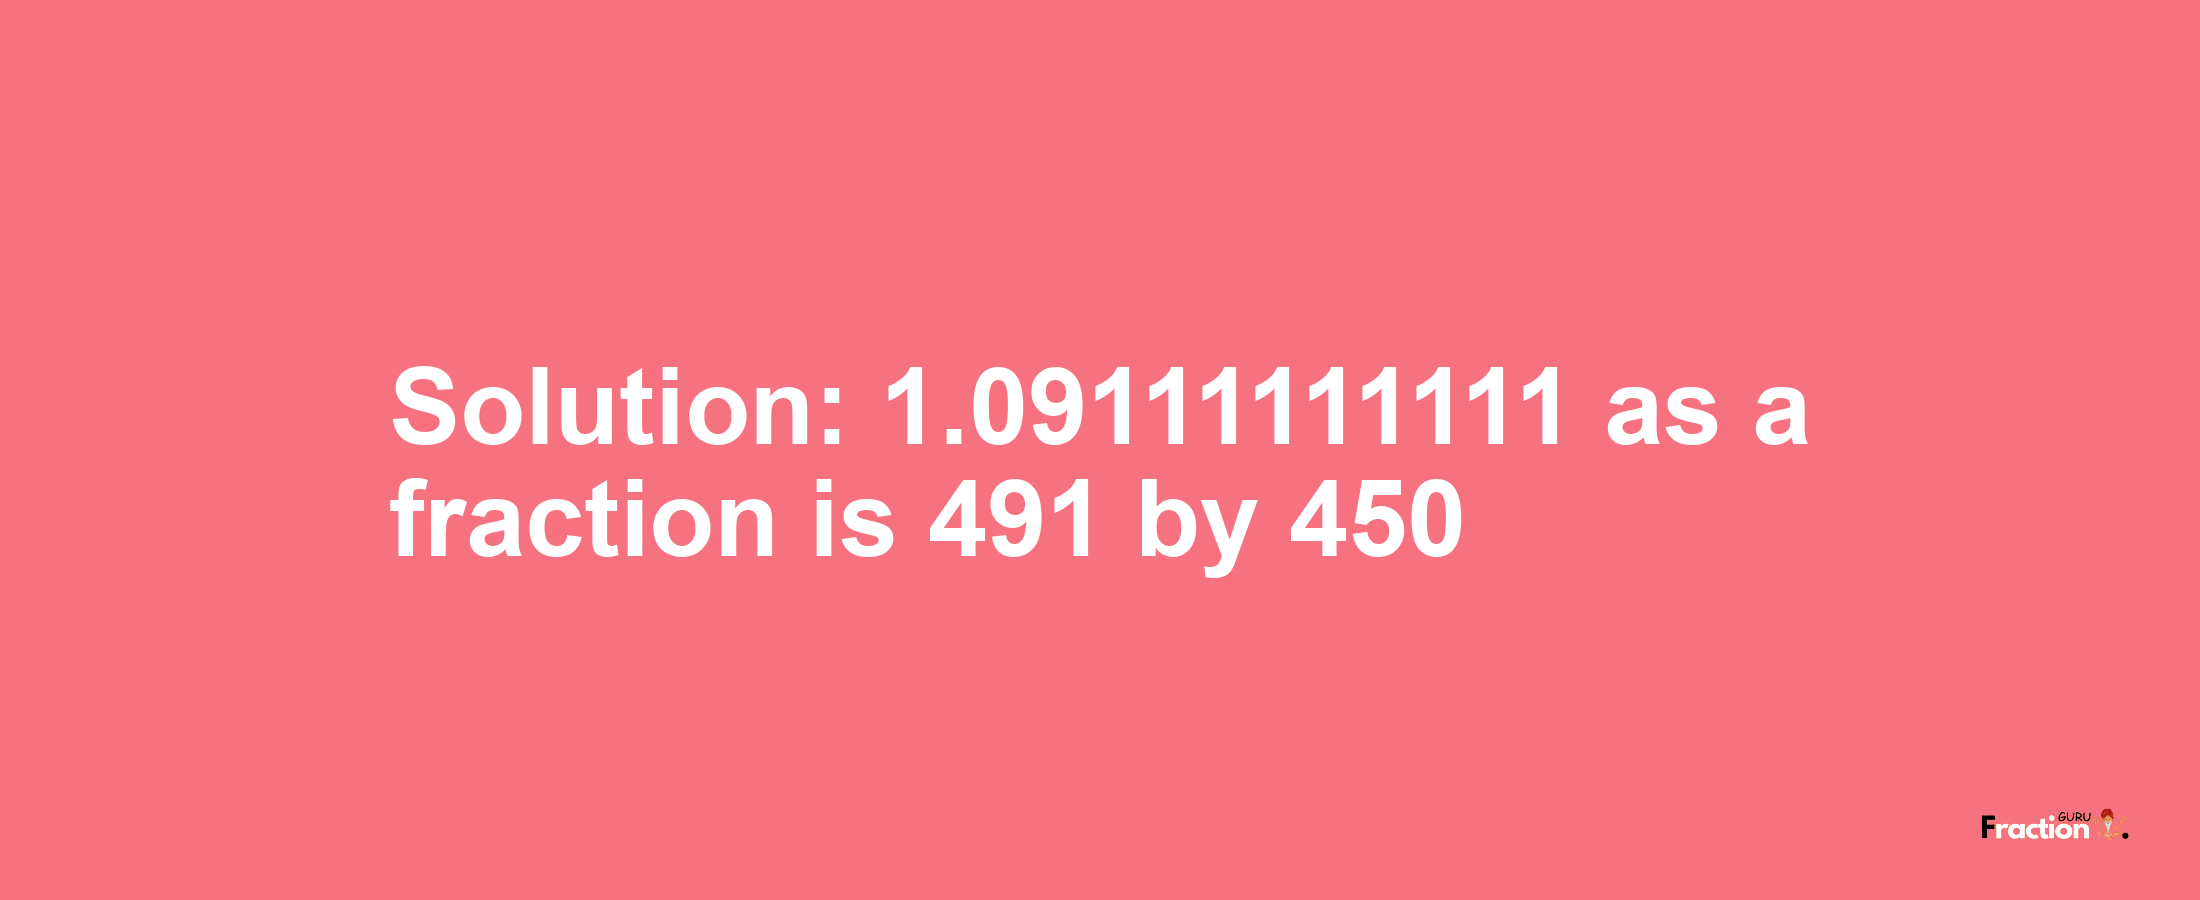 Solution:1.09111111111 as a fraction is 491/450